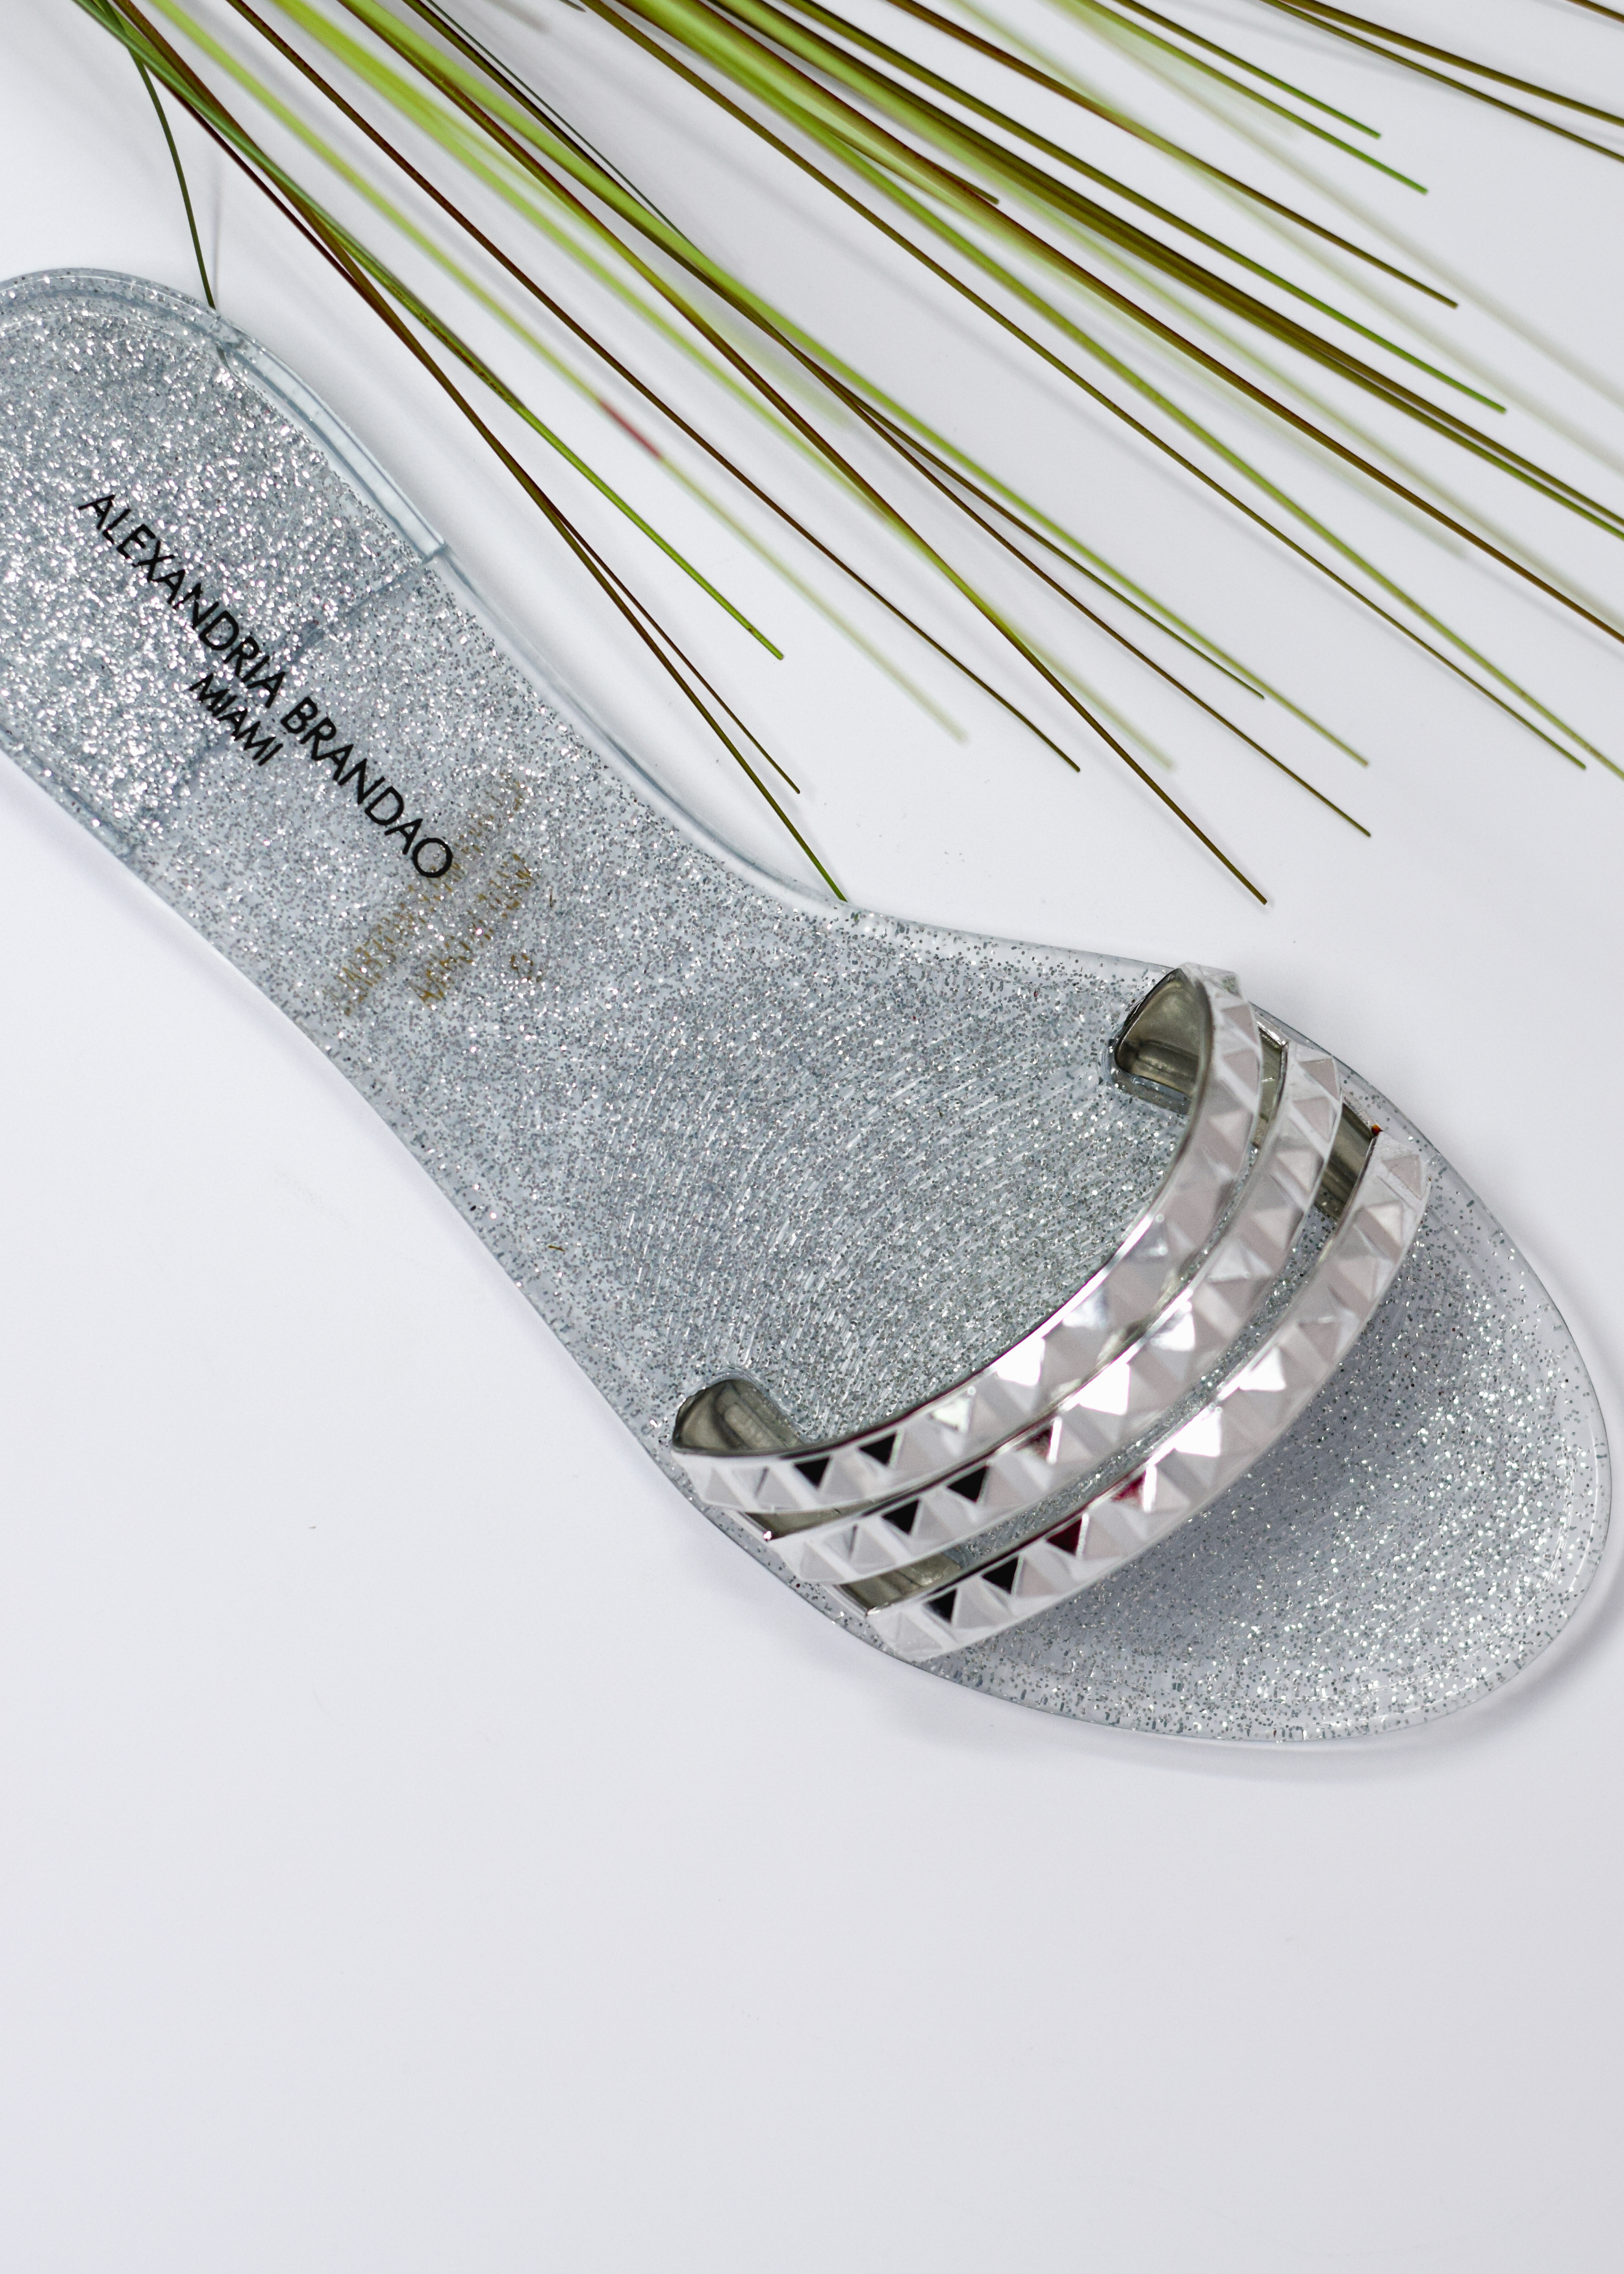 SHOES BY ALEXANDRIA BRANDAO ARIA B SILVER GLITTER STUDDED STRAP SANDALS AND FASHION SLIDES